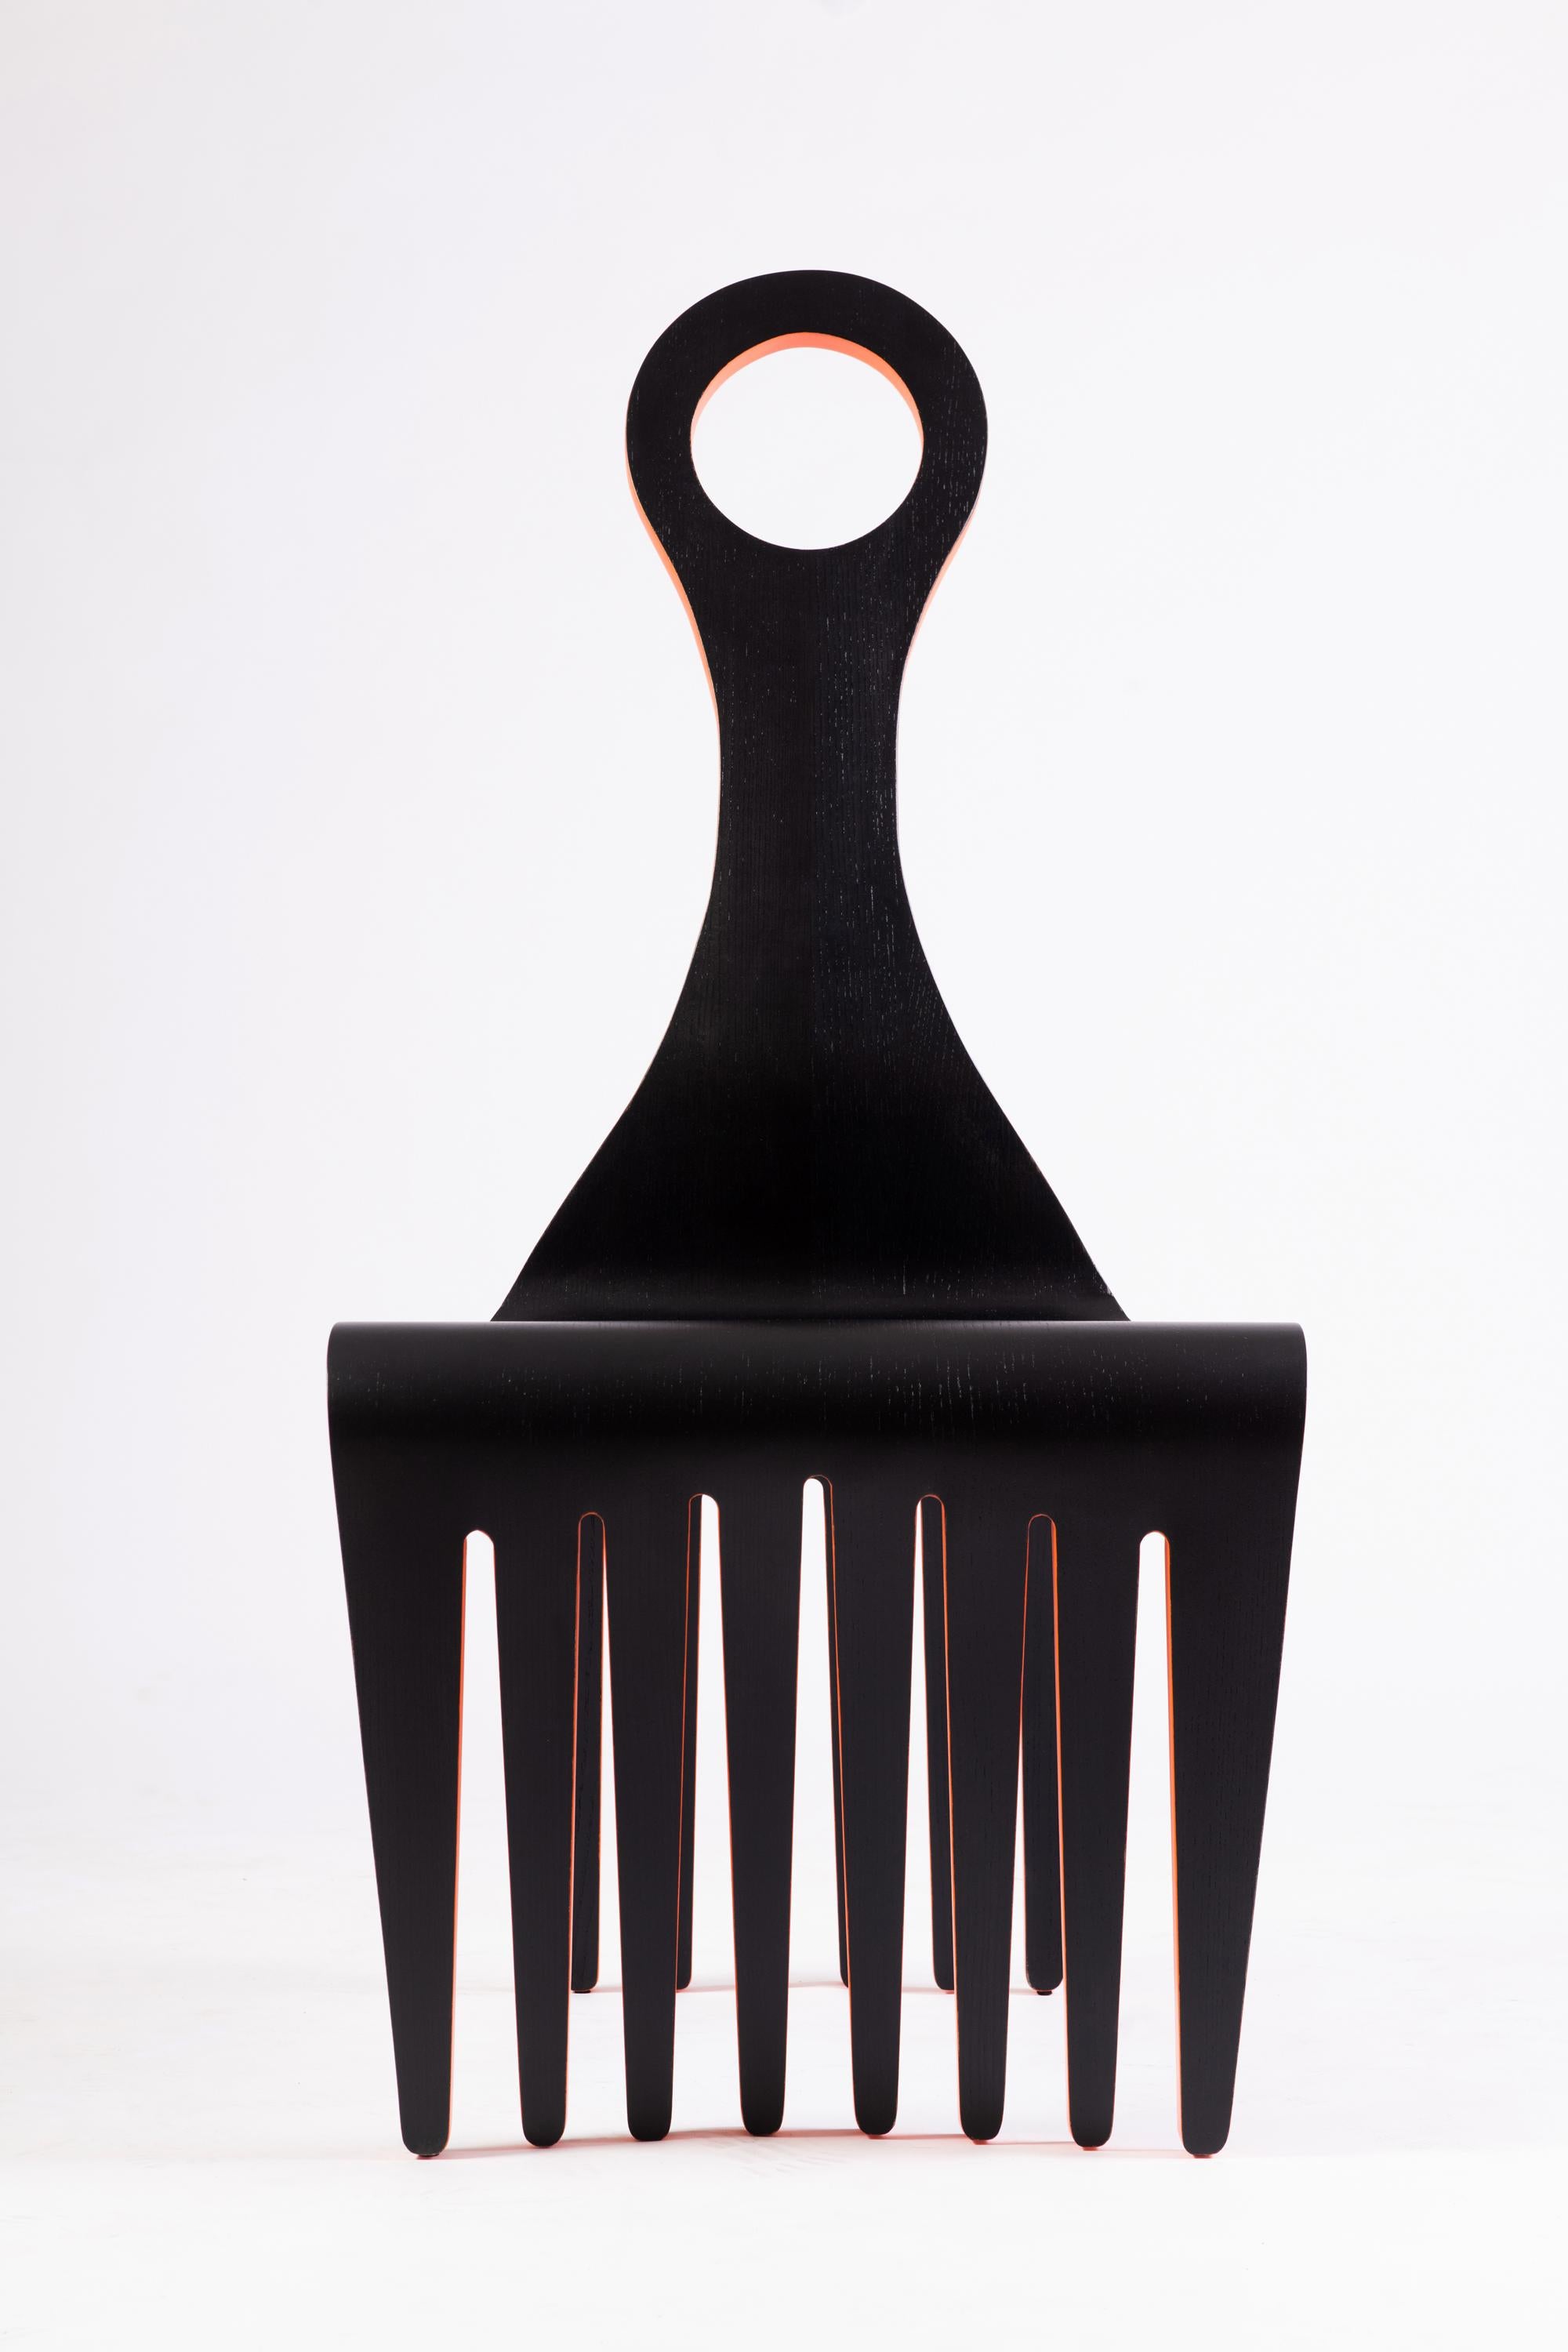 Jomo Tariku
Meedo Chair, 2022
Ebonized and painted ash
43 x 22 x 23 in
Ed. 1/18
 
The Meedo Chair design unites the rich history of the Afro Comb with the African tradition of a ceremonial seat signifying leadership, unity and kinship. The